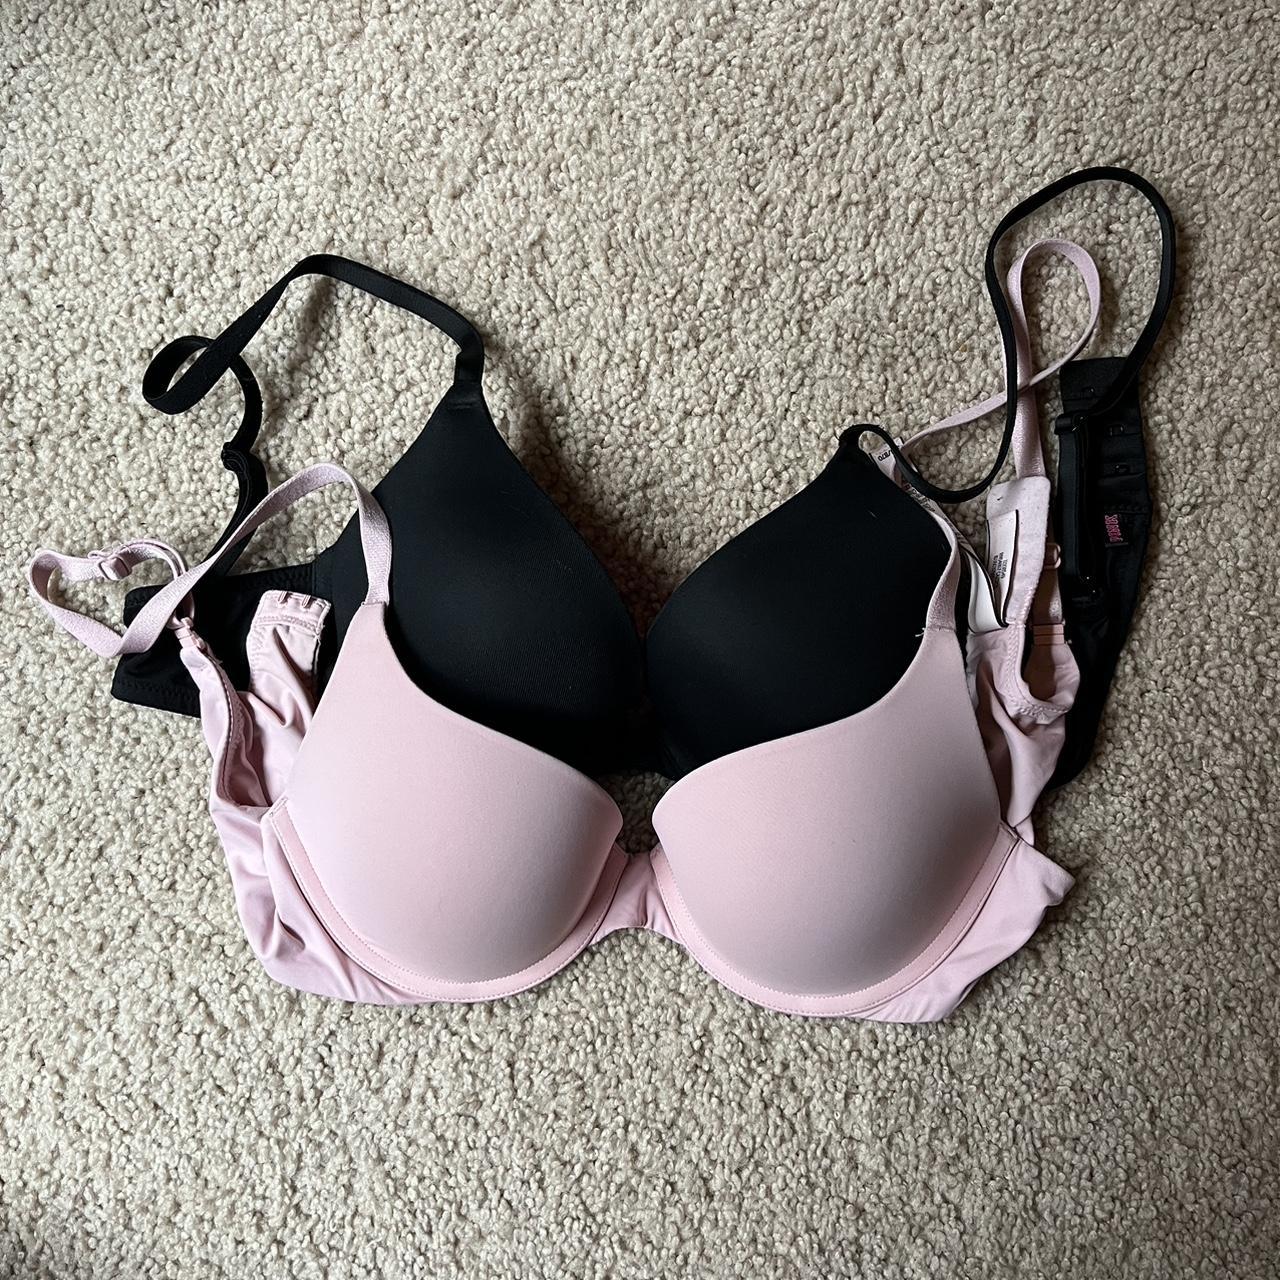 32B Pink Everyday Push Up Bra Bundle, Comes with